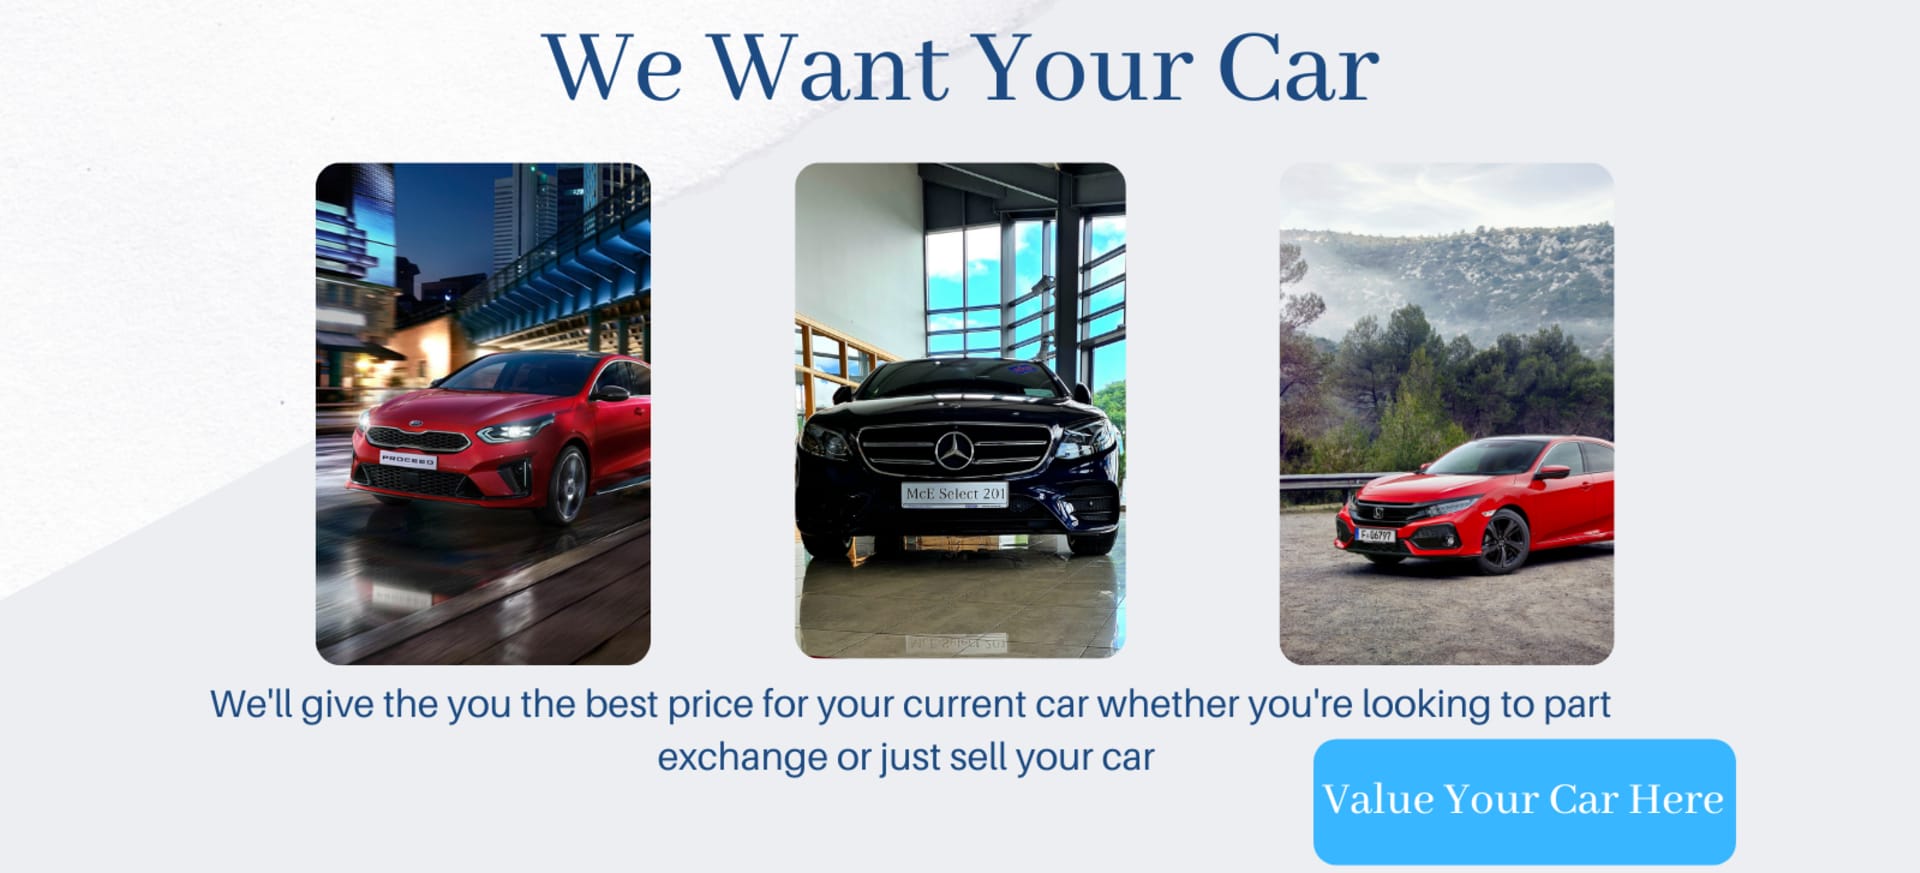 We Want Your Car